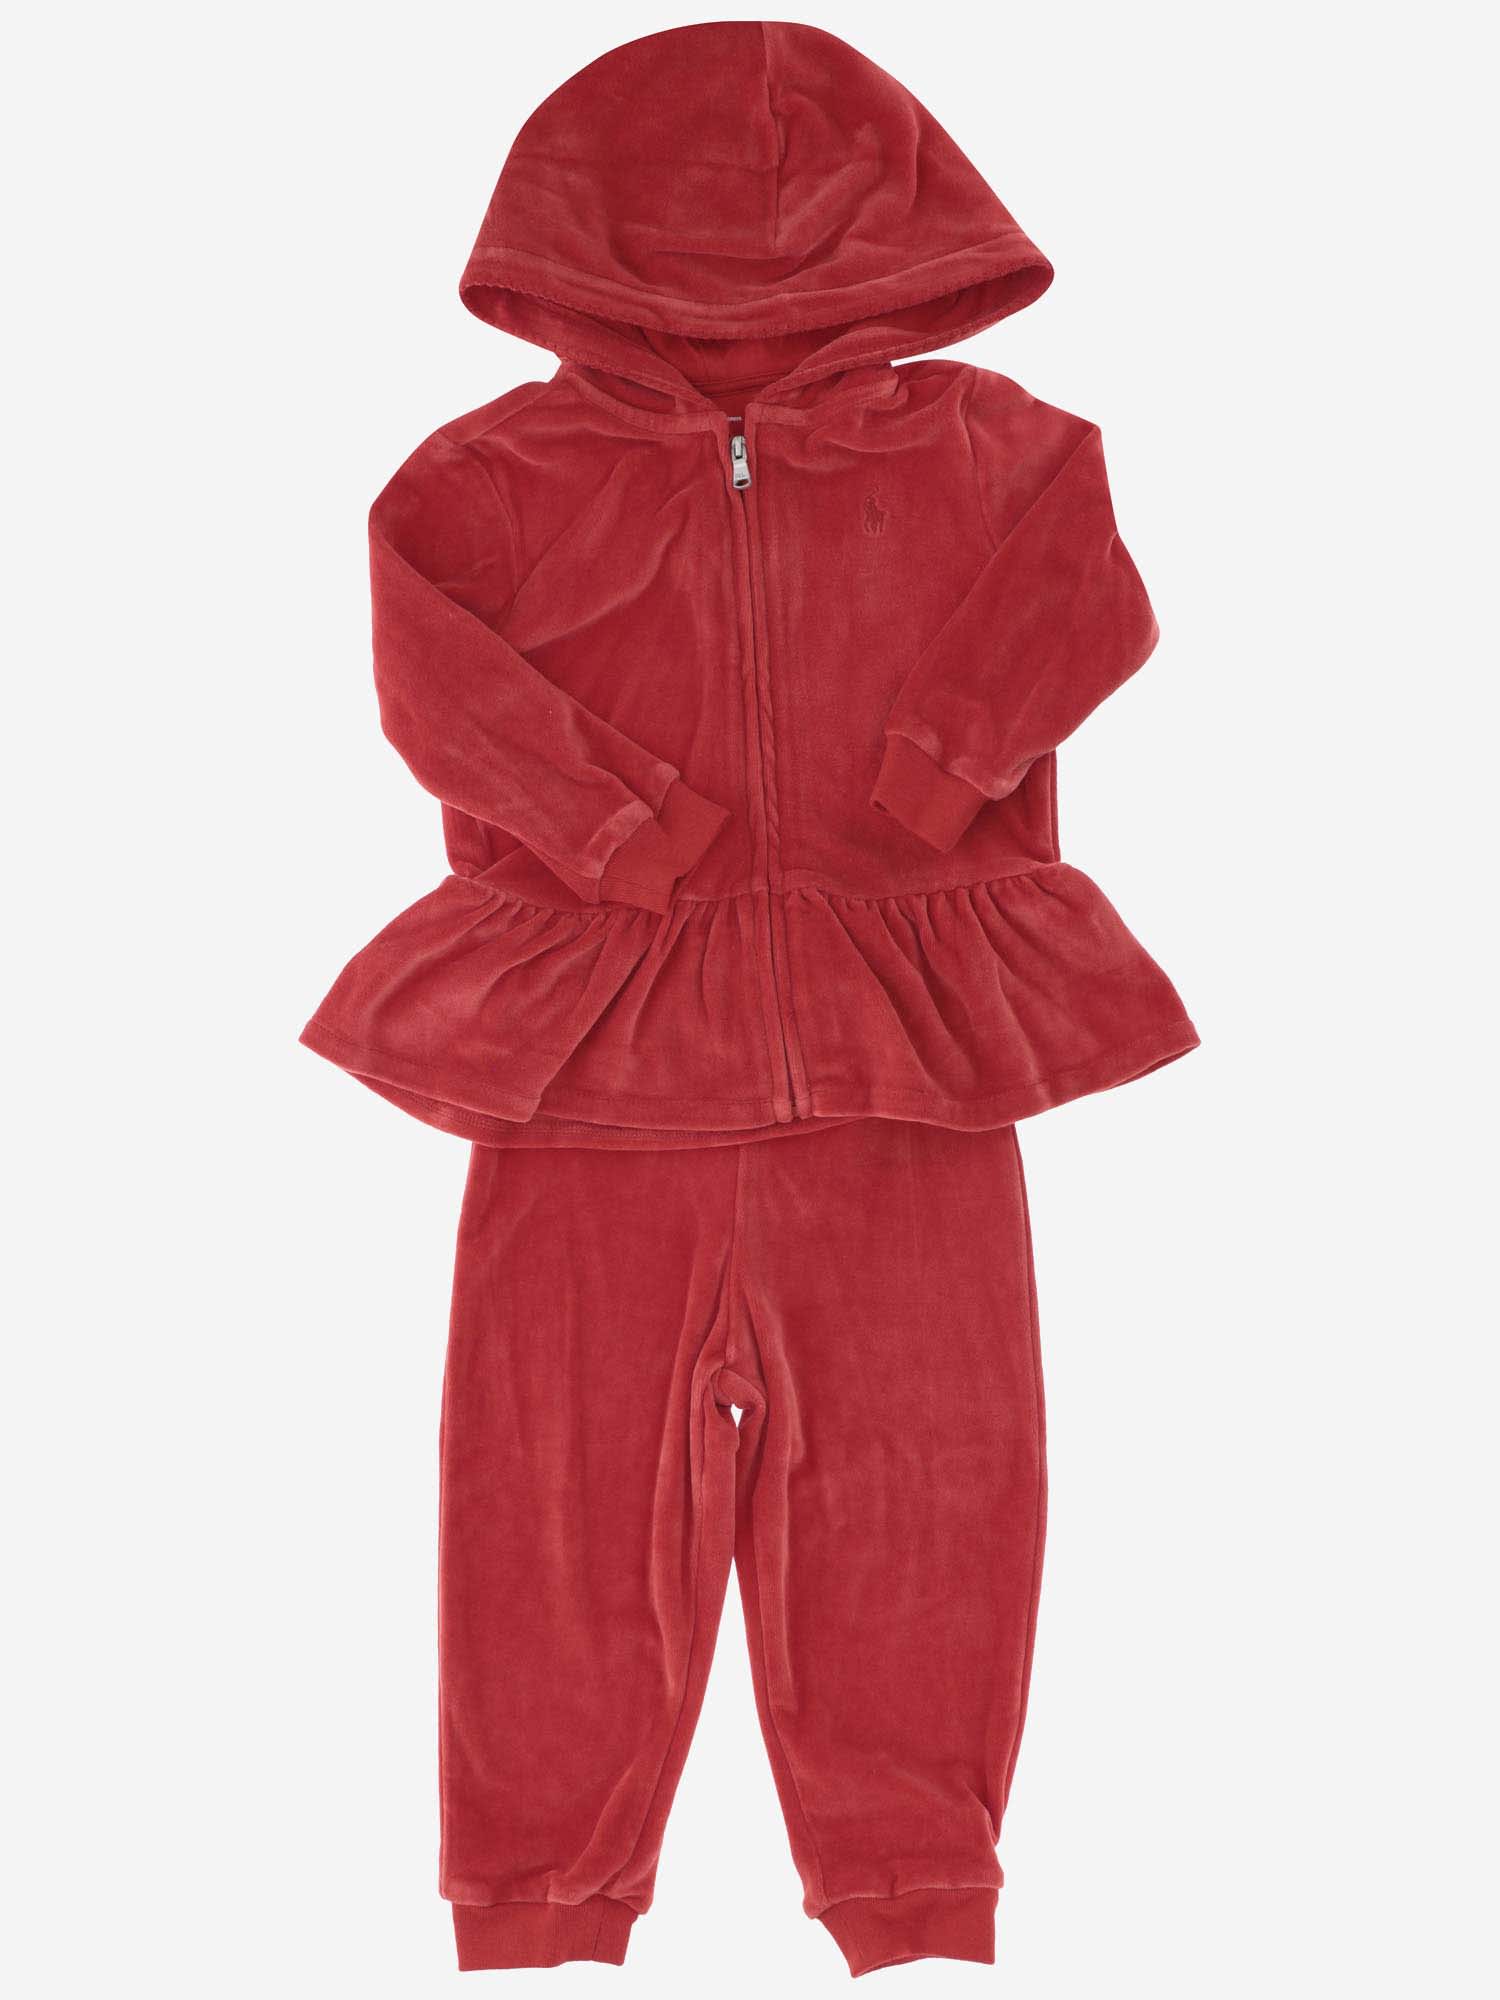 Polo Ralph Lauren Babies' Velvet Outfit Set In Red